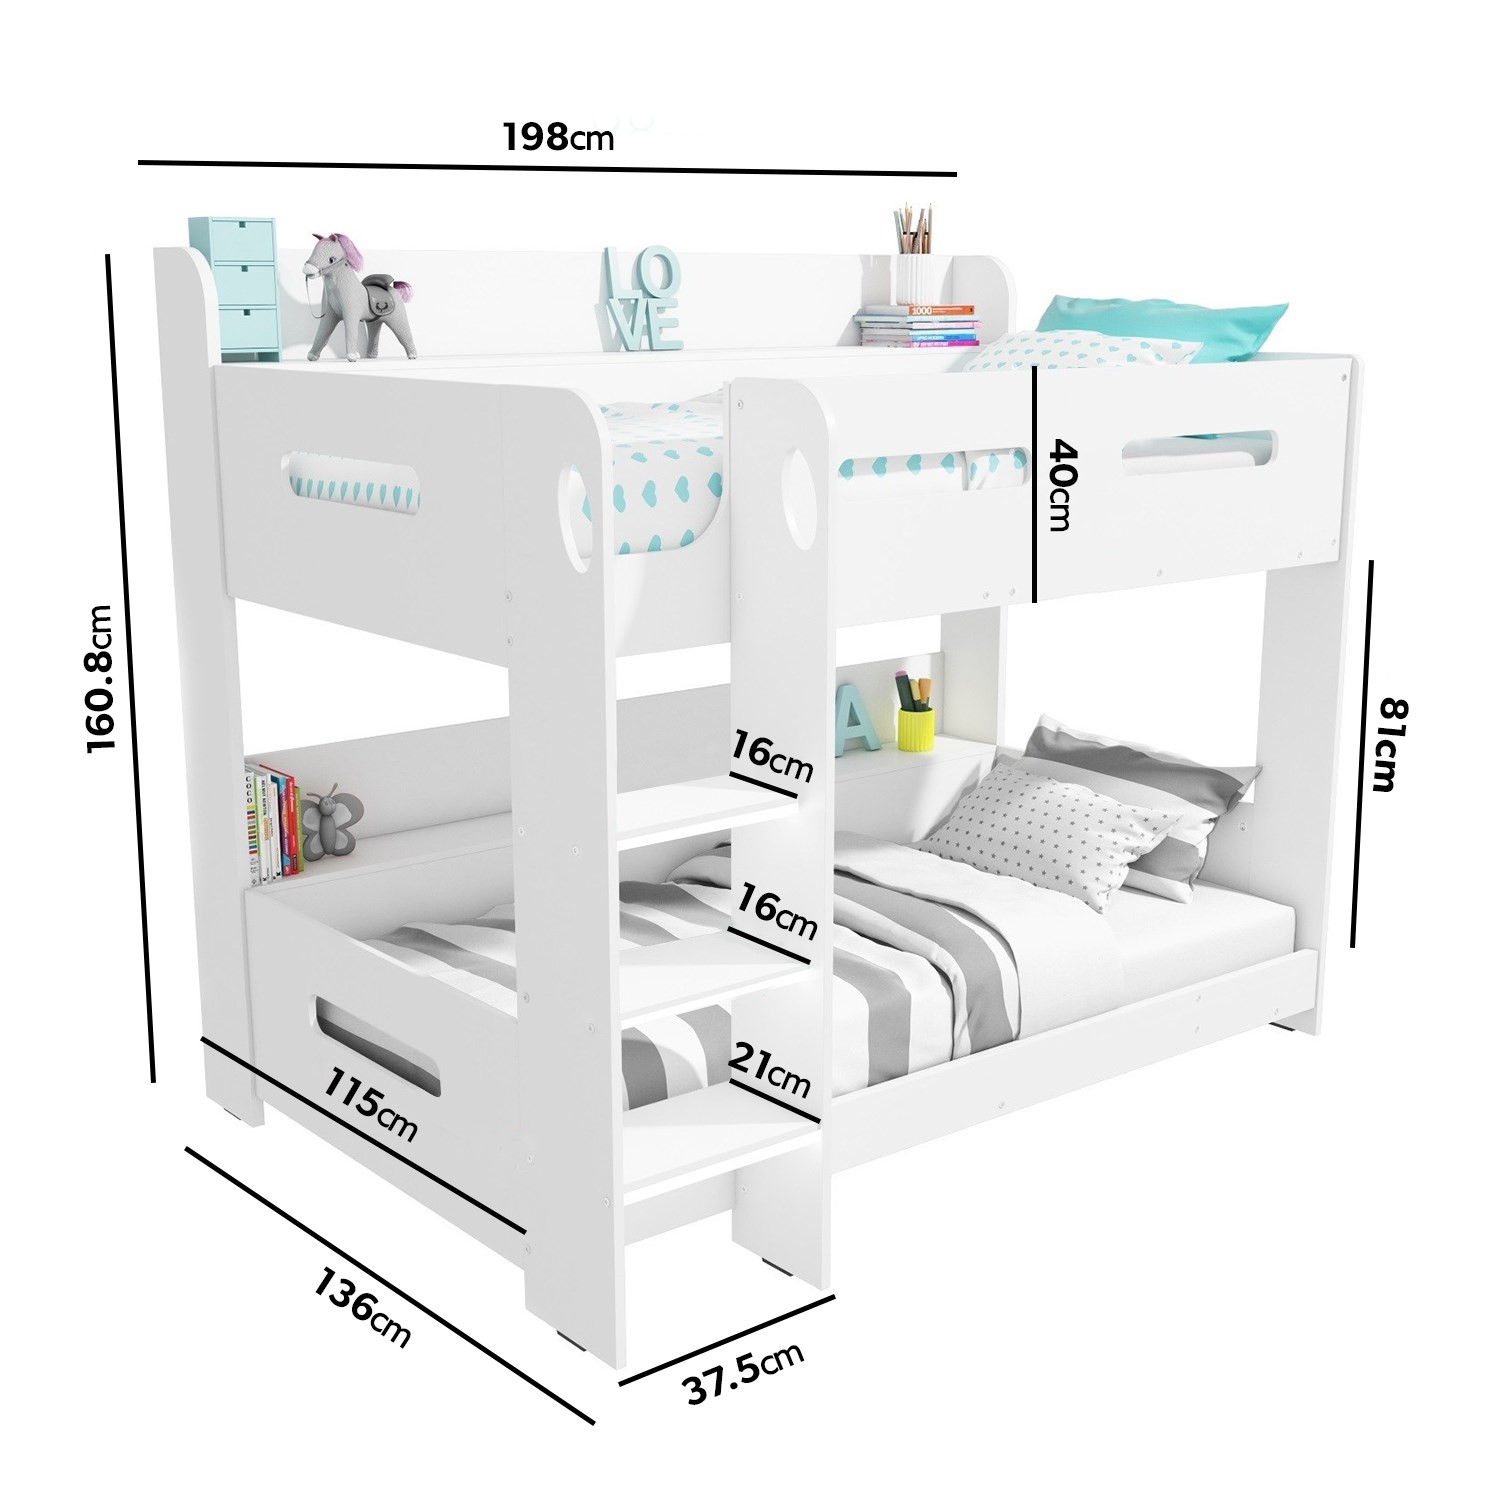 White Wooden Bunk Bed With Shelves, Wooden Bunk Bed Connectors